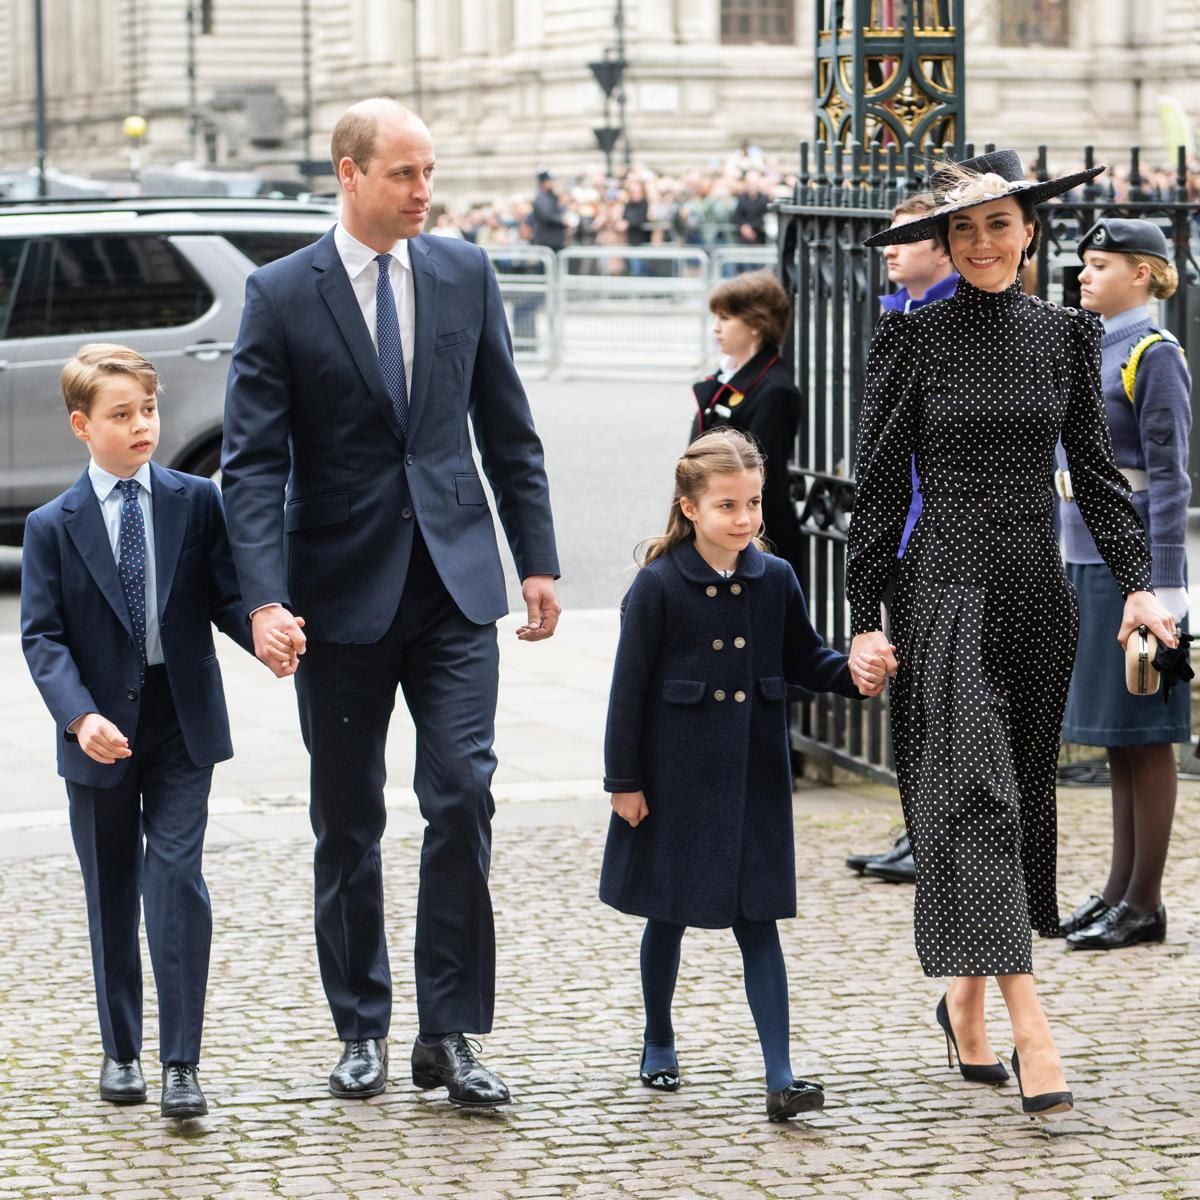 Princess Charlotte held her mom's hand, while Prince George held on to his father as they arrived at Westminster Abbey, where the Duke and Duchess of Cambridge tied the knot over a decade ago. Three-year-old Prince Louis was absent from the family outing.